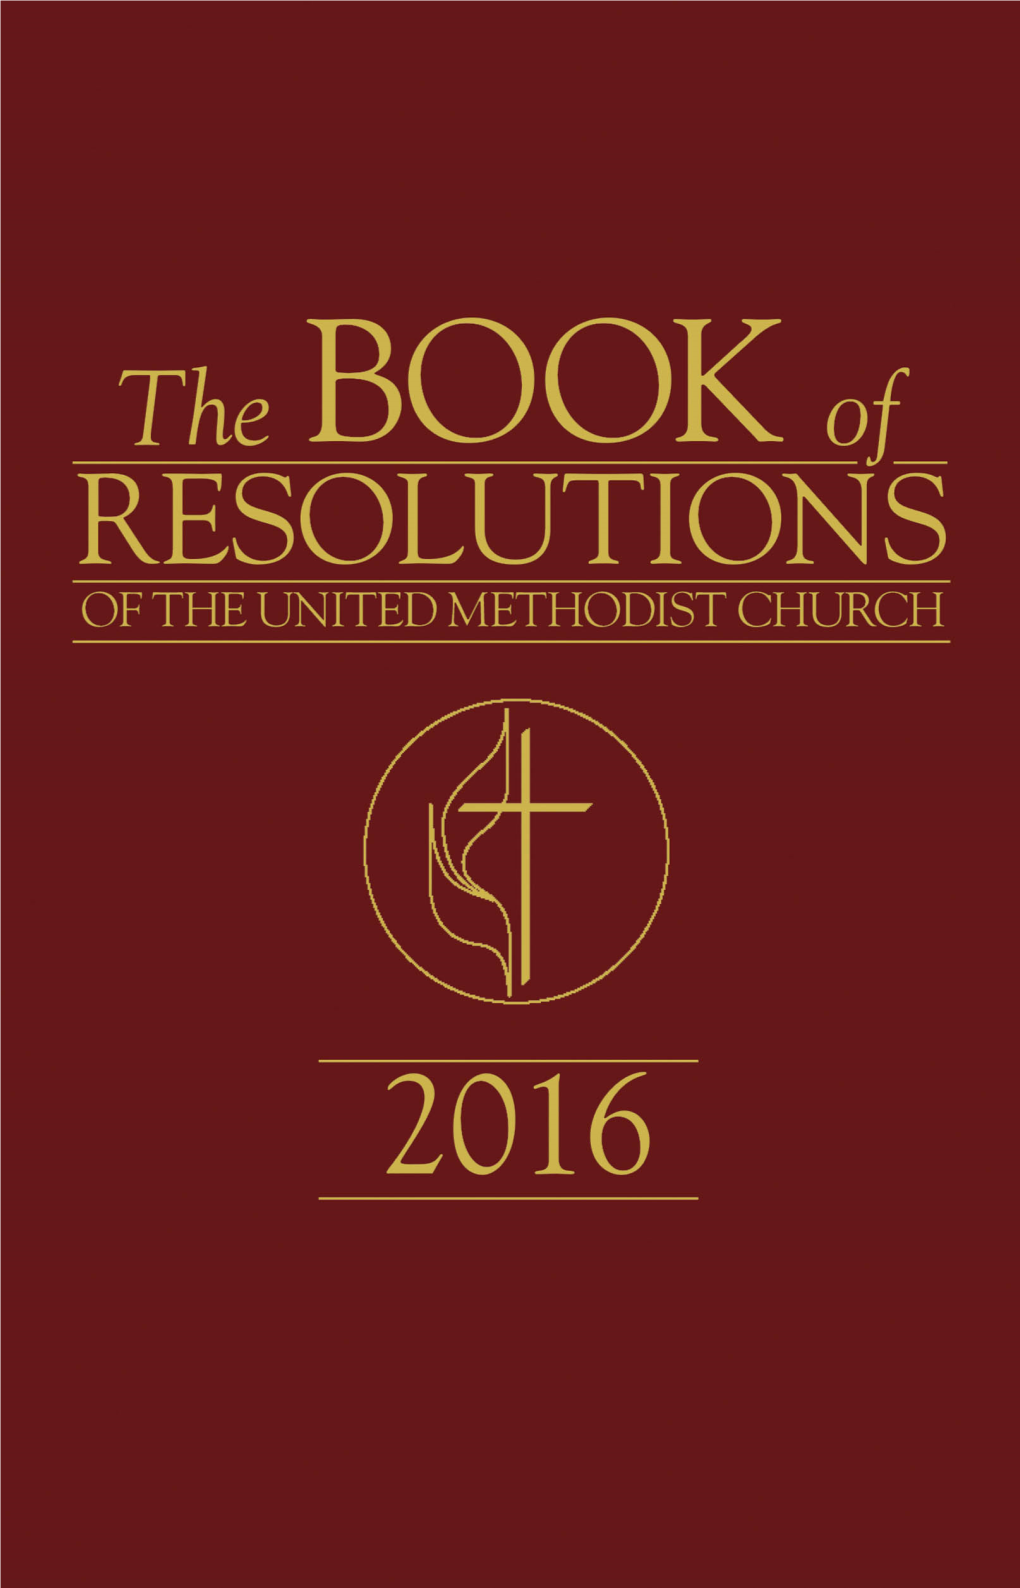 The Book of Resolutions 2016